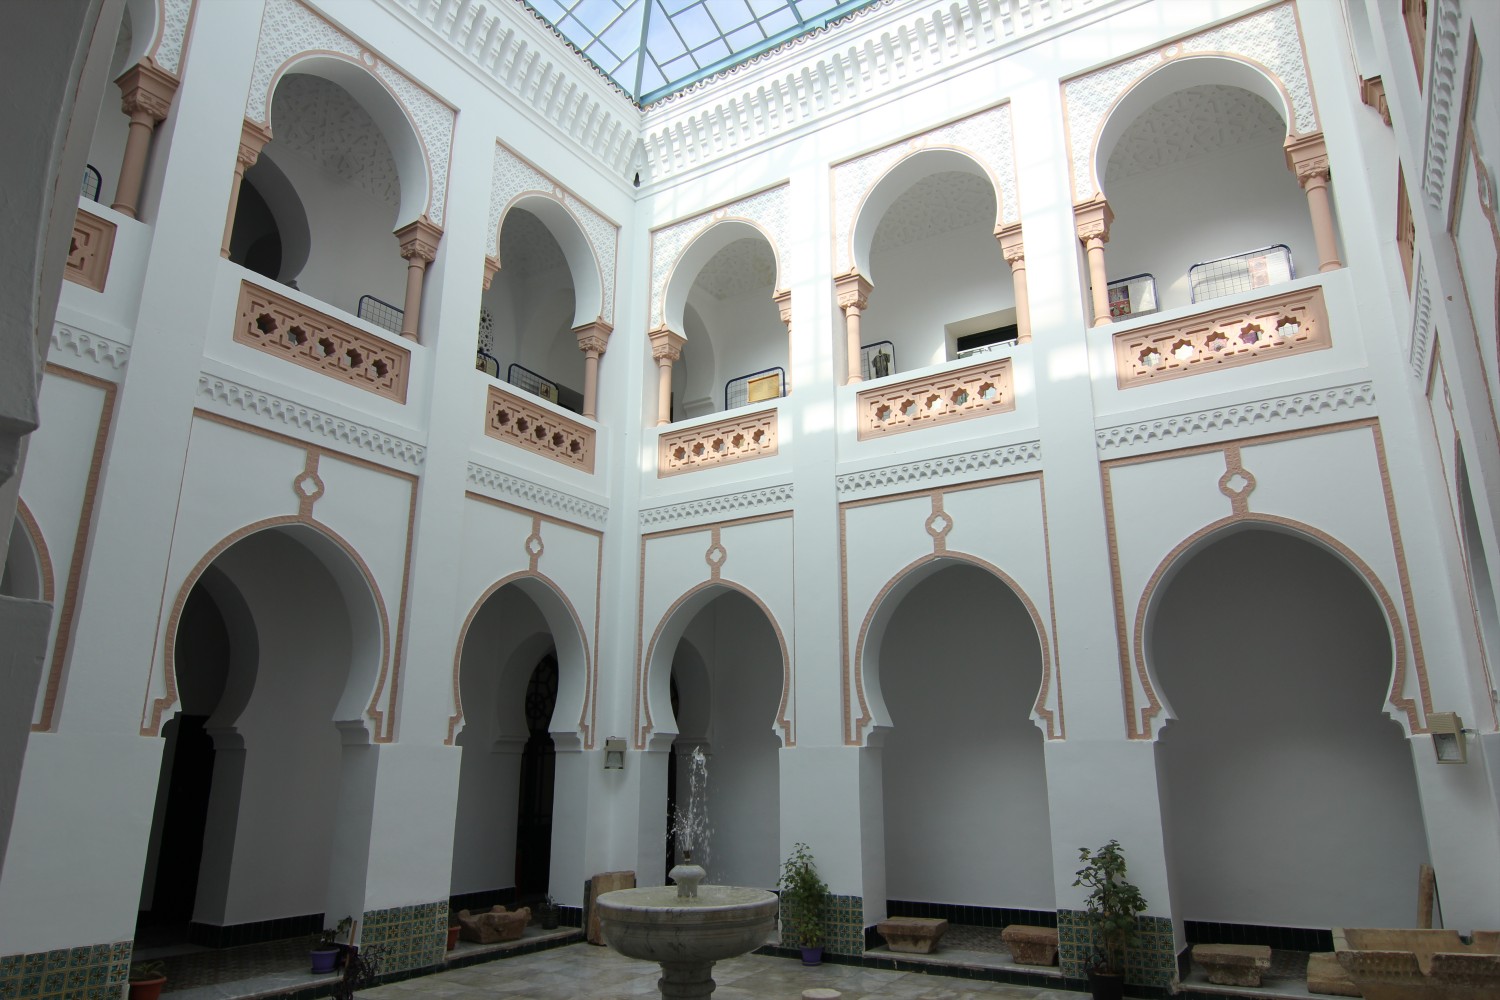 View of the courtyard showing pointed horseshoe arches